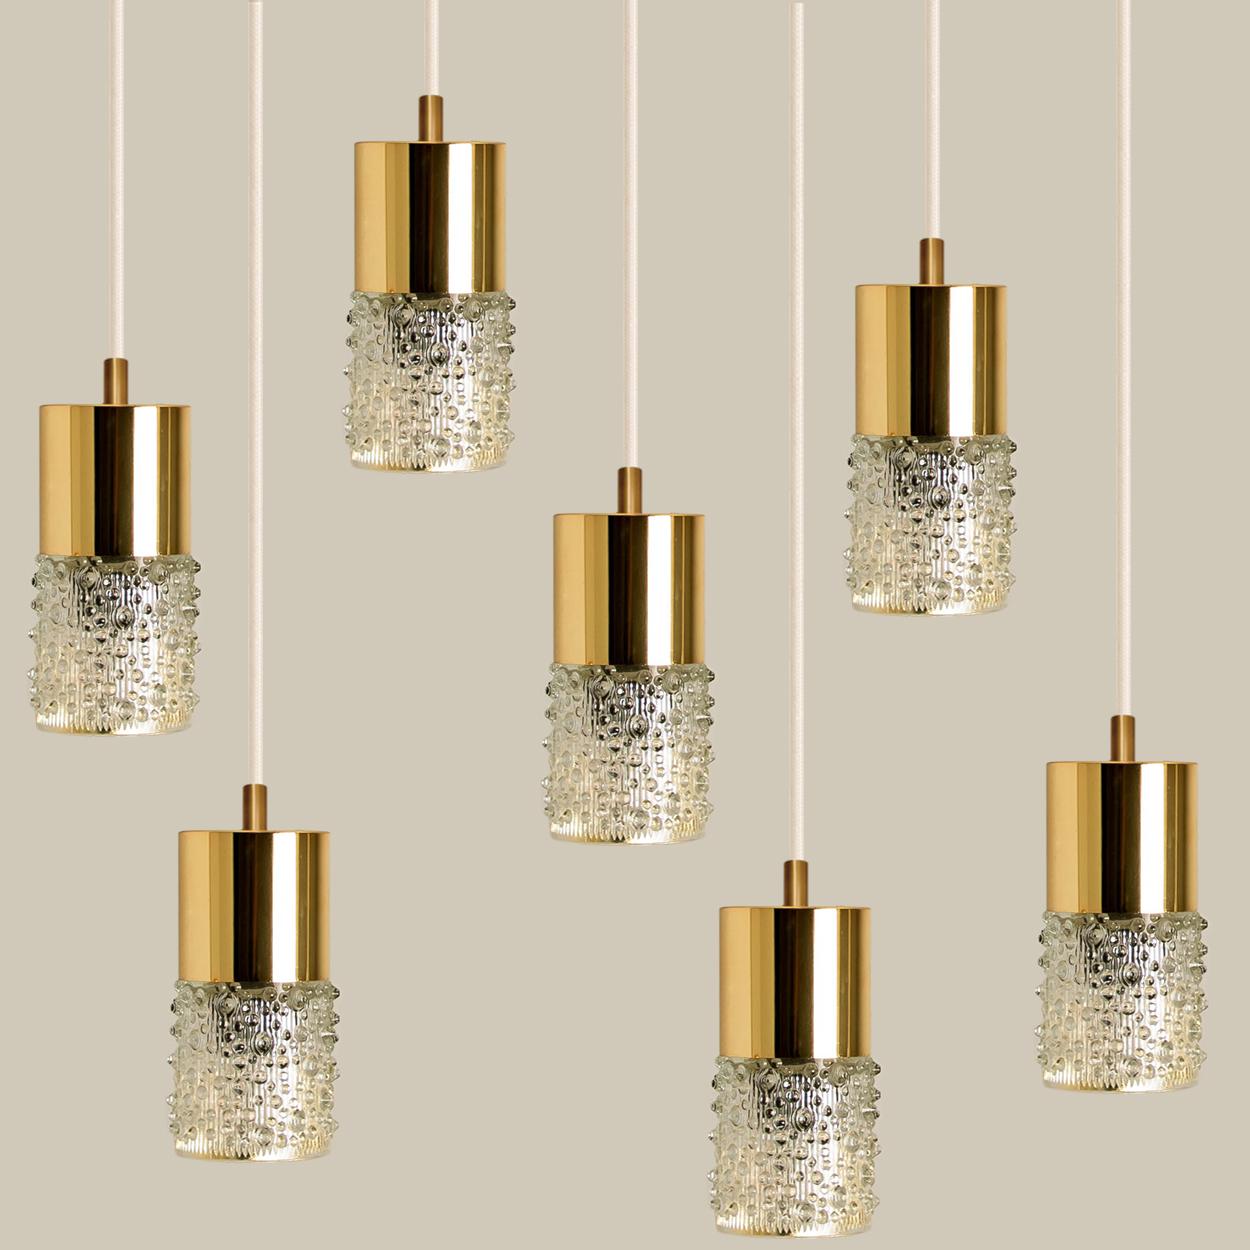 Pressed Glass and Brass Pendant Lights, 1970s For Sale 2